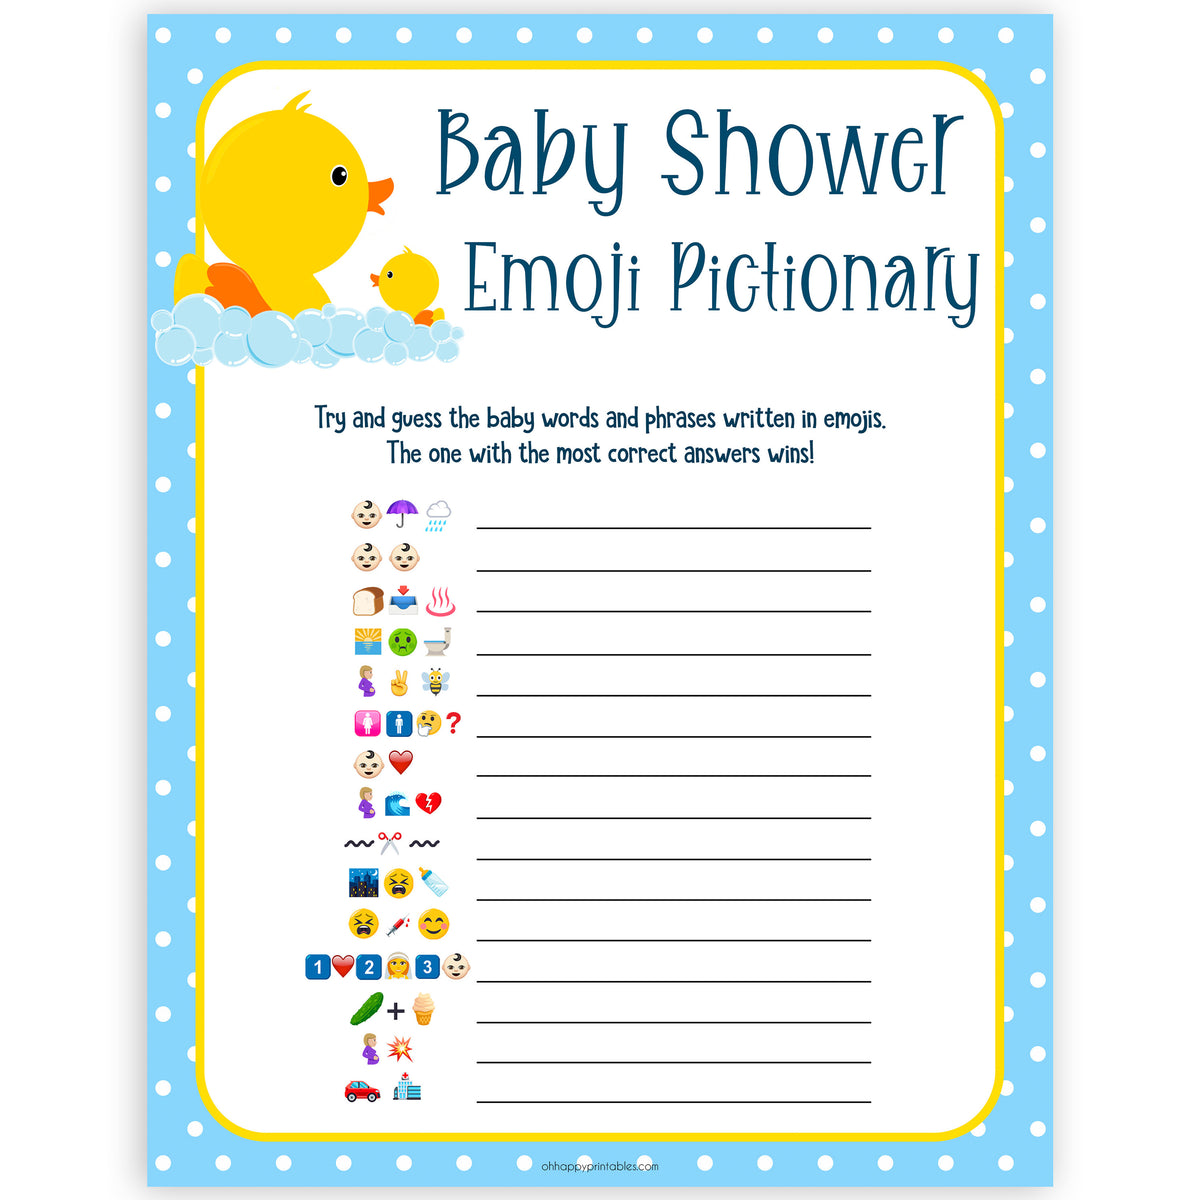 baby-shower-emoji-pictionary-answer-waltery-learning-solution-for-student